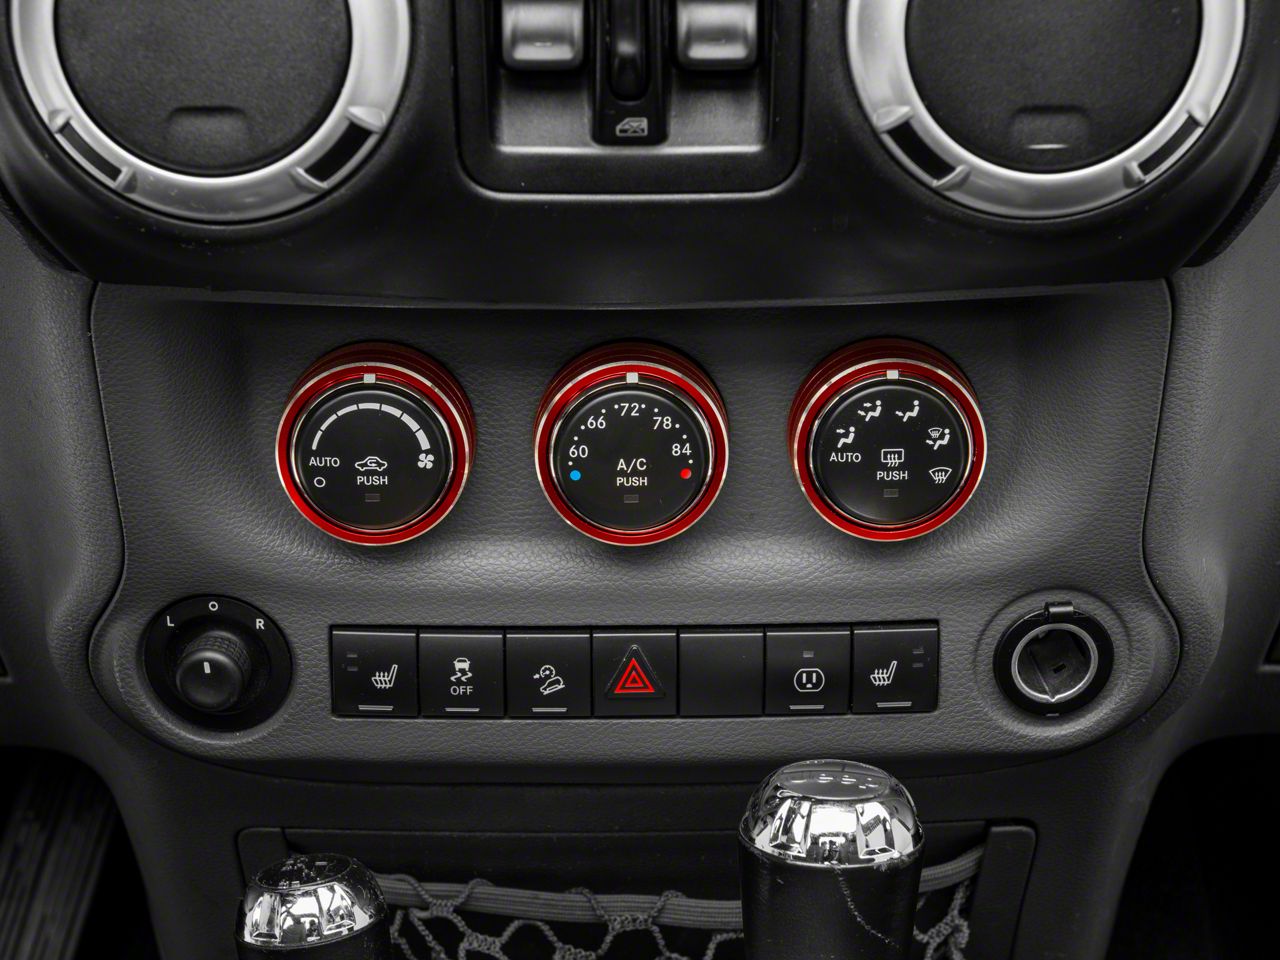 Wrangler JK Climate Control Knob Trim Rings Compatible with 2011-2018 Jeep Wrangler JK Models Red Custom Interior Styling Billet Aluminum Anodized Finish HVAC Control Knob Trim Ring Bezels Set 